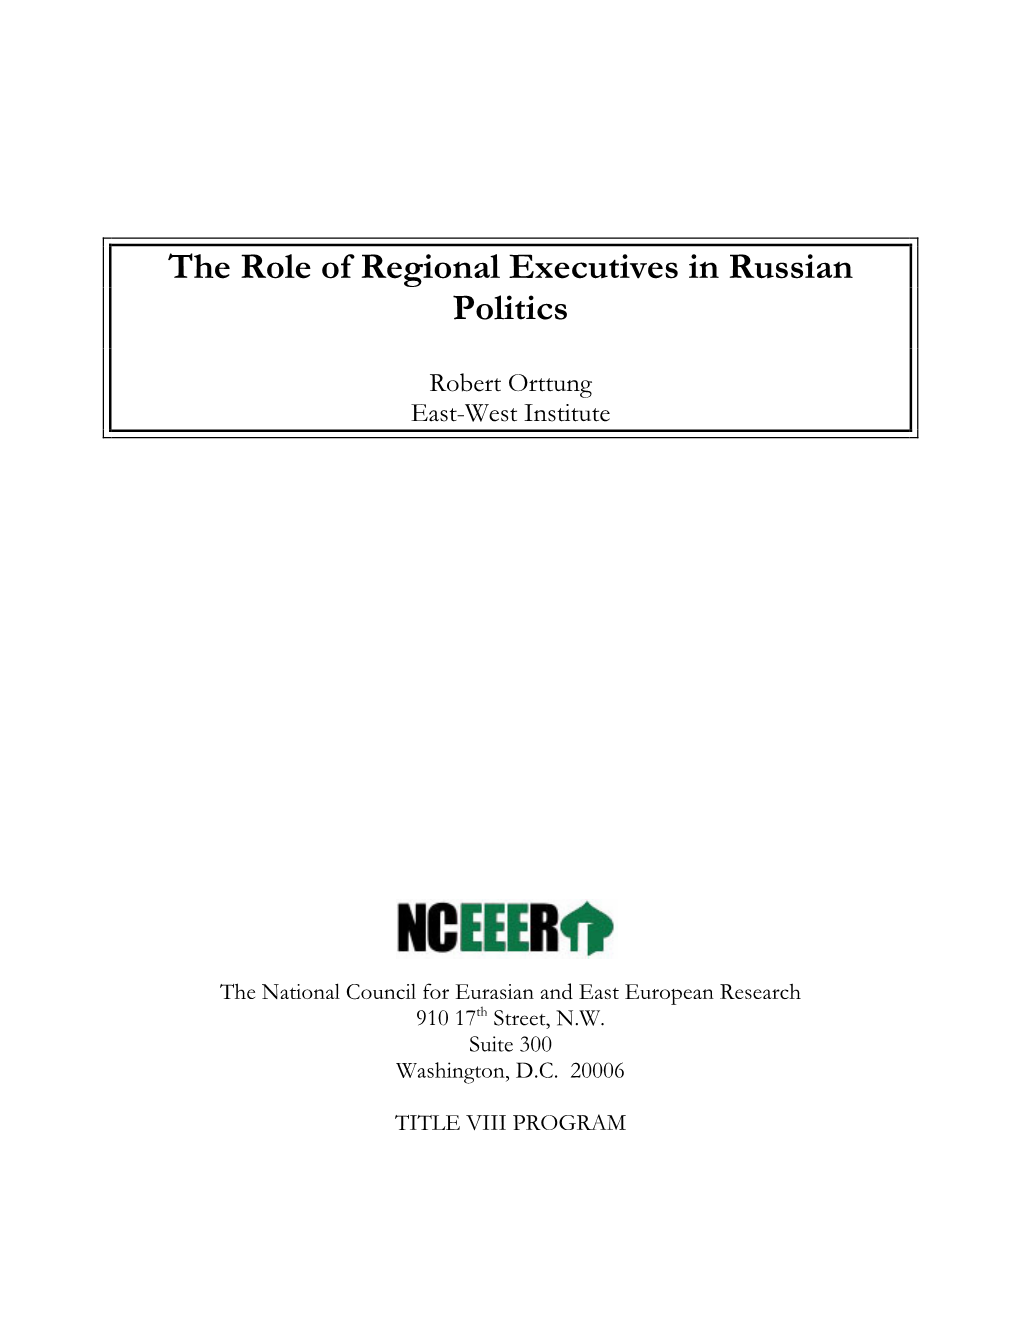 The Role of Regional Executives in Russian Politics